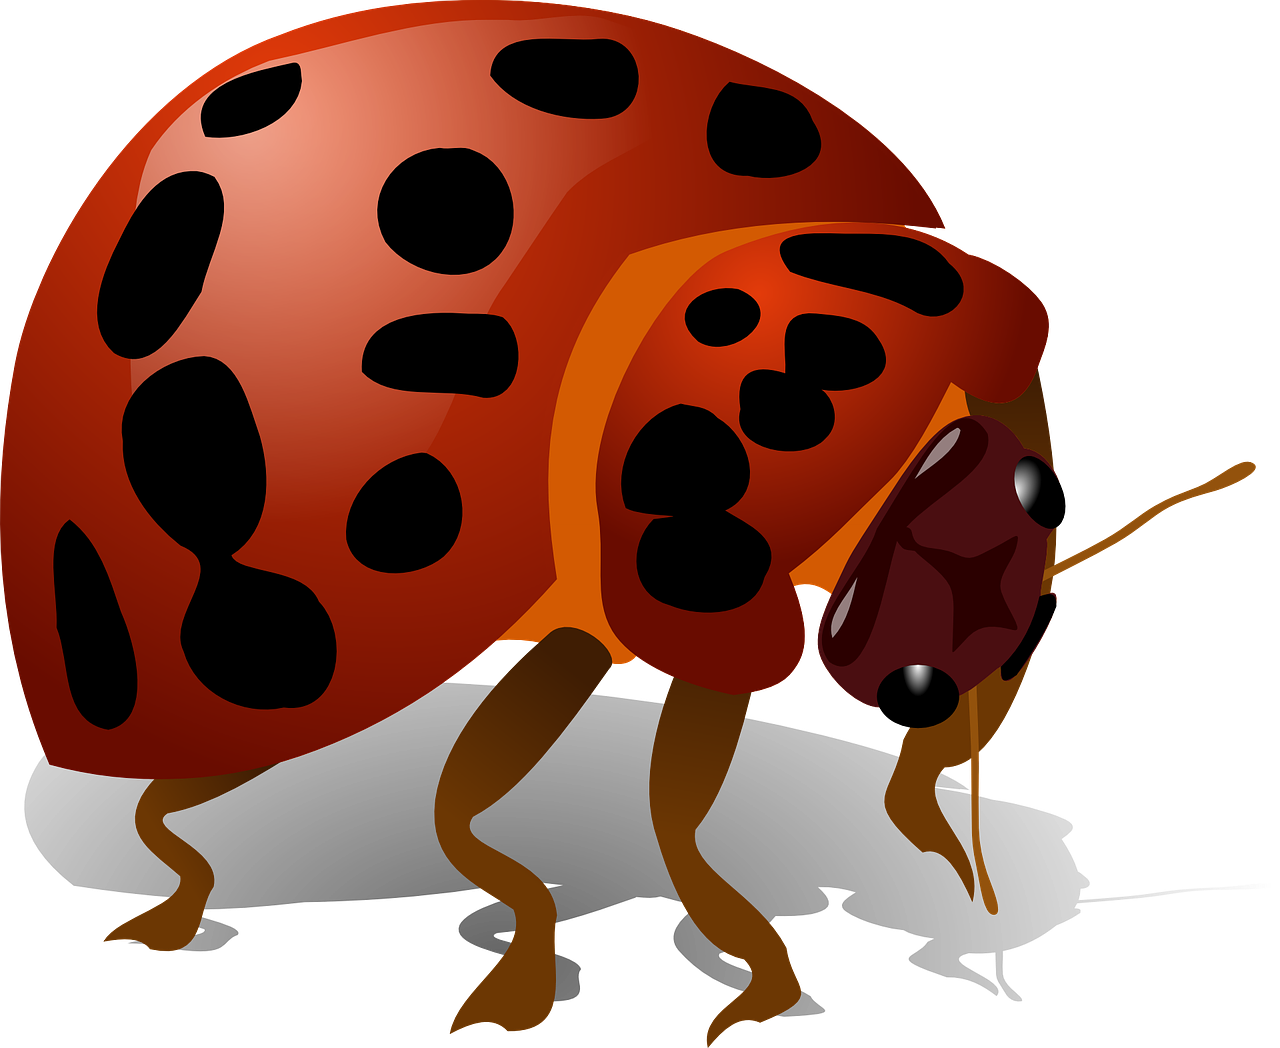 Ladybug bug red ladybird. Insect clipart group insect